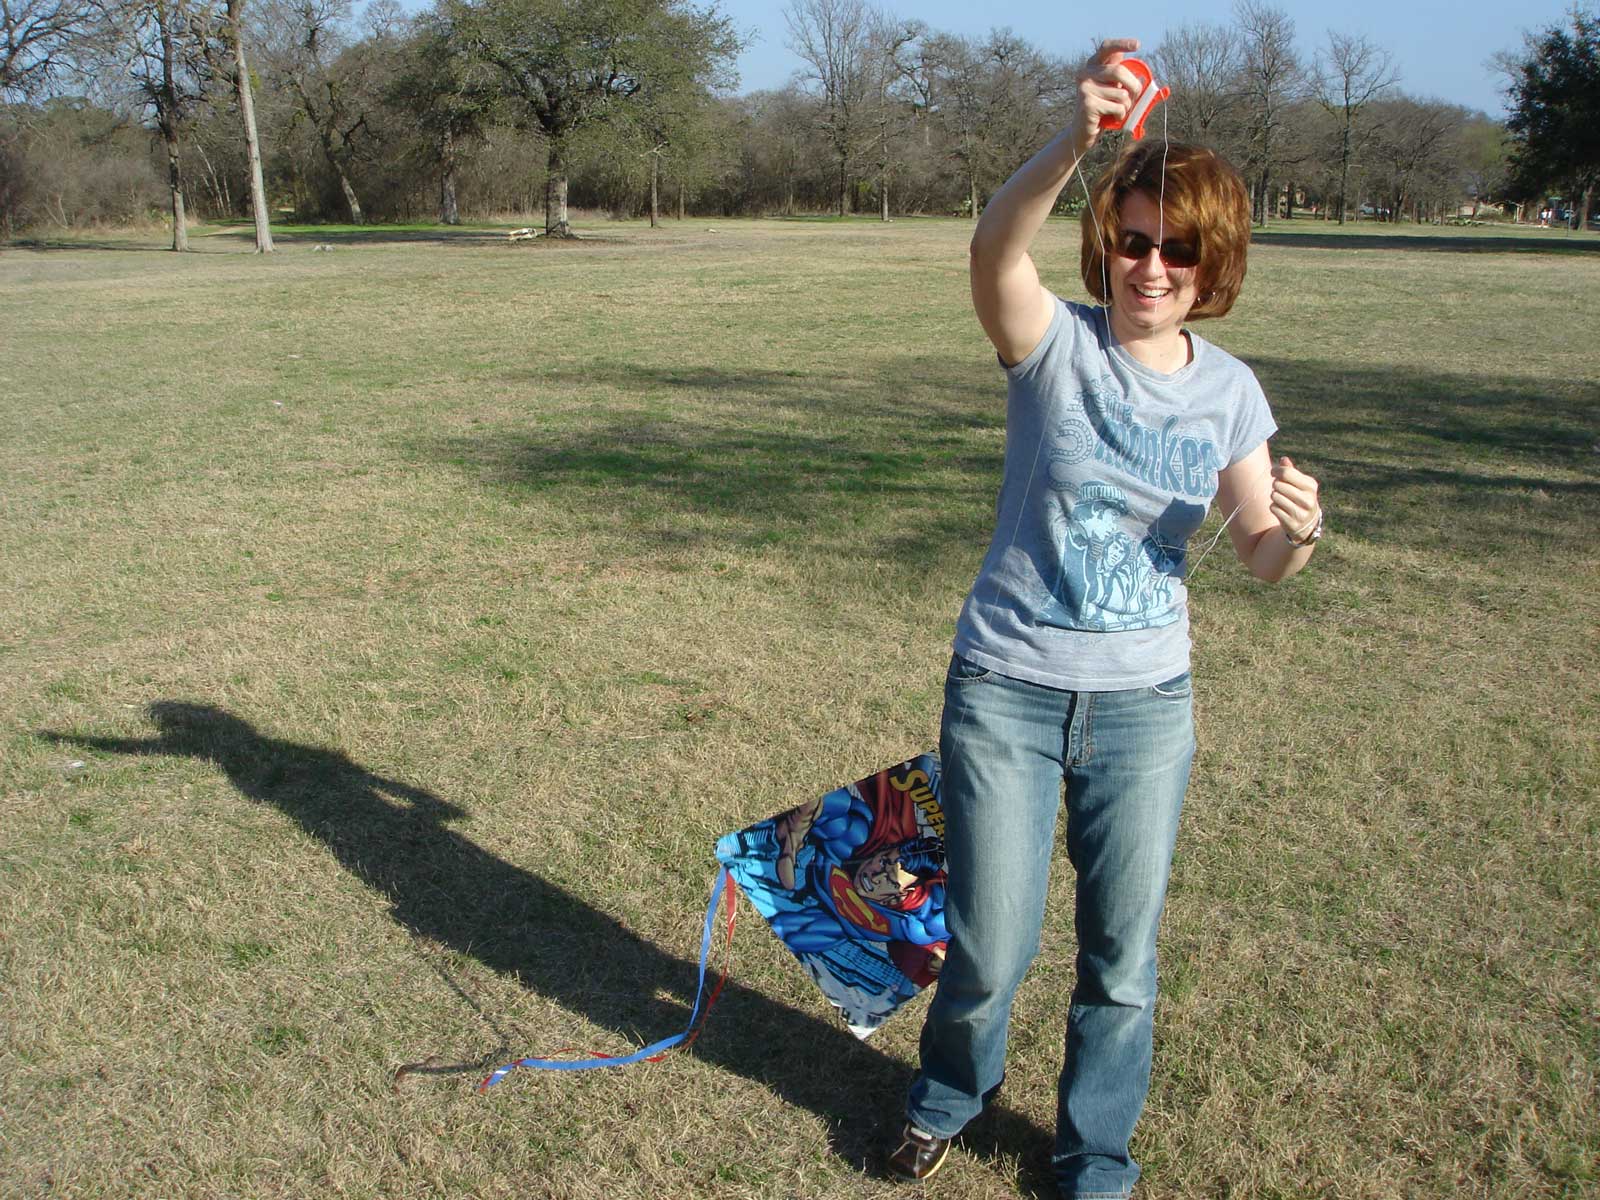 Rebecca with her kite